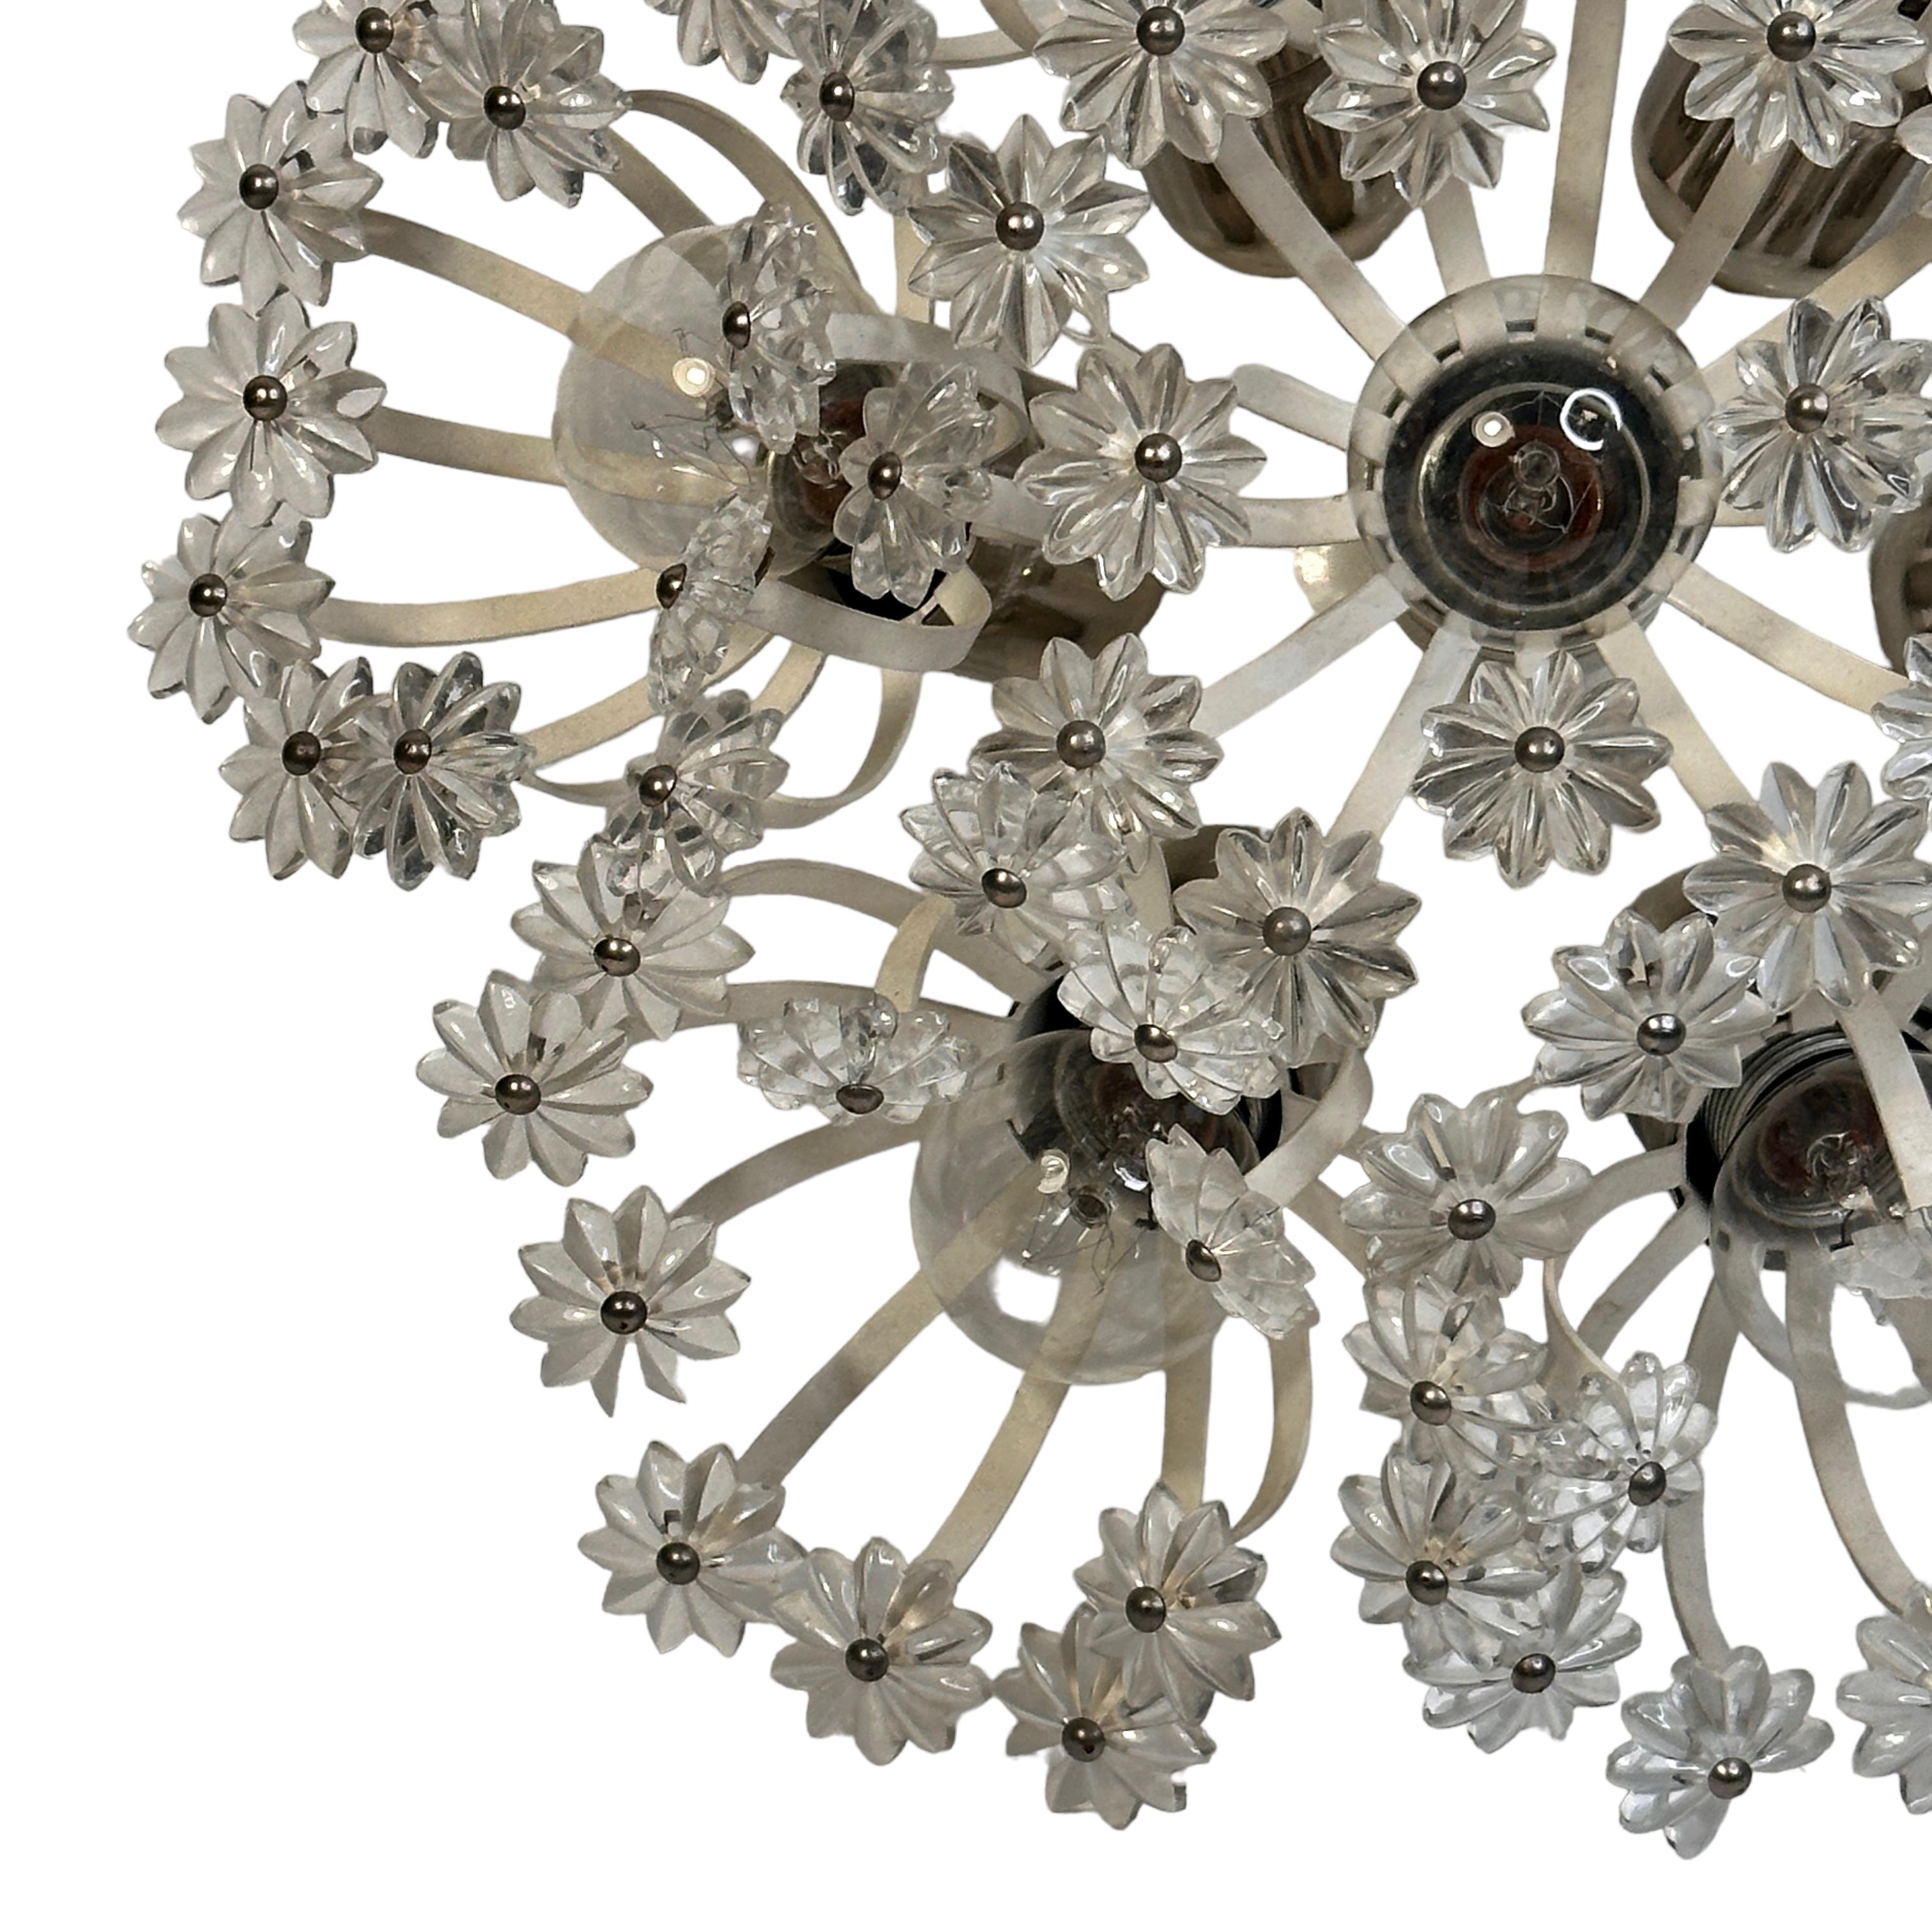 A stunning Flower Bouquet Emil Stejnar Flush Mount Light or Sconce. It is consisting of a Mid-Century Modern style design. The Fixture requires seven European E14 / 110 Volt Candelabra bulbs, each bulb up to 40 watts. Found at an estate sale in